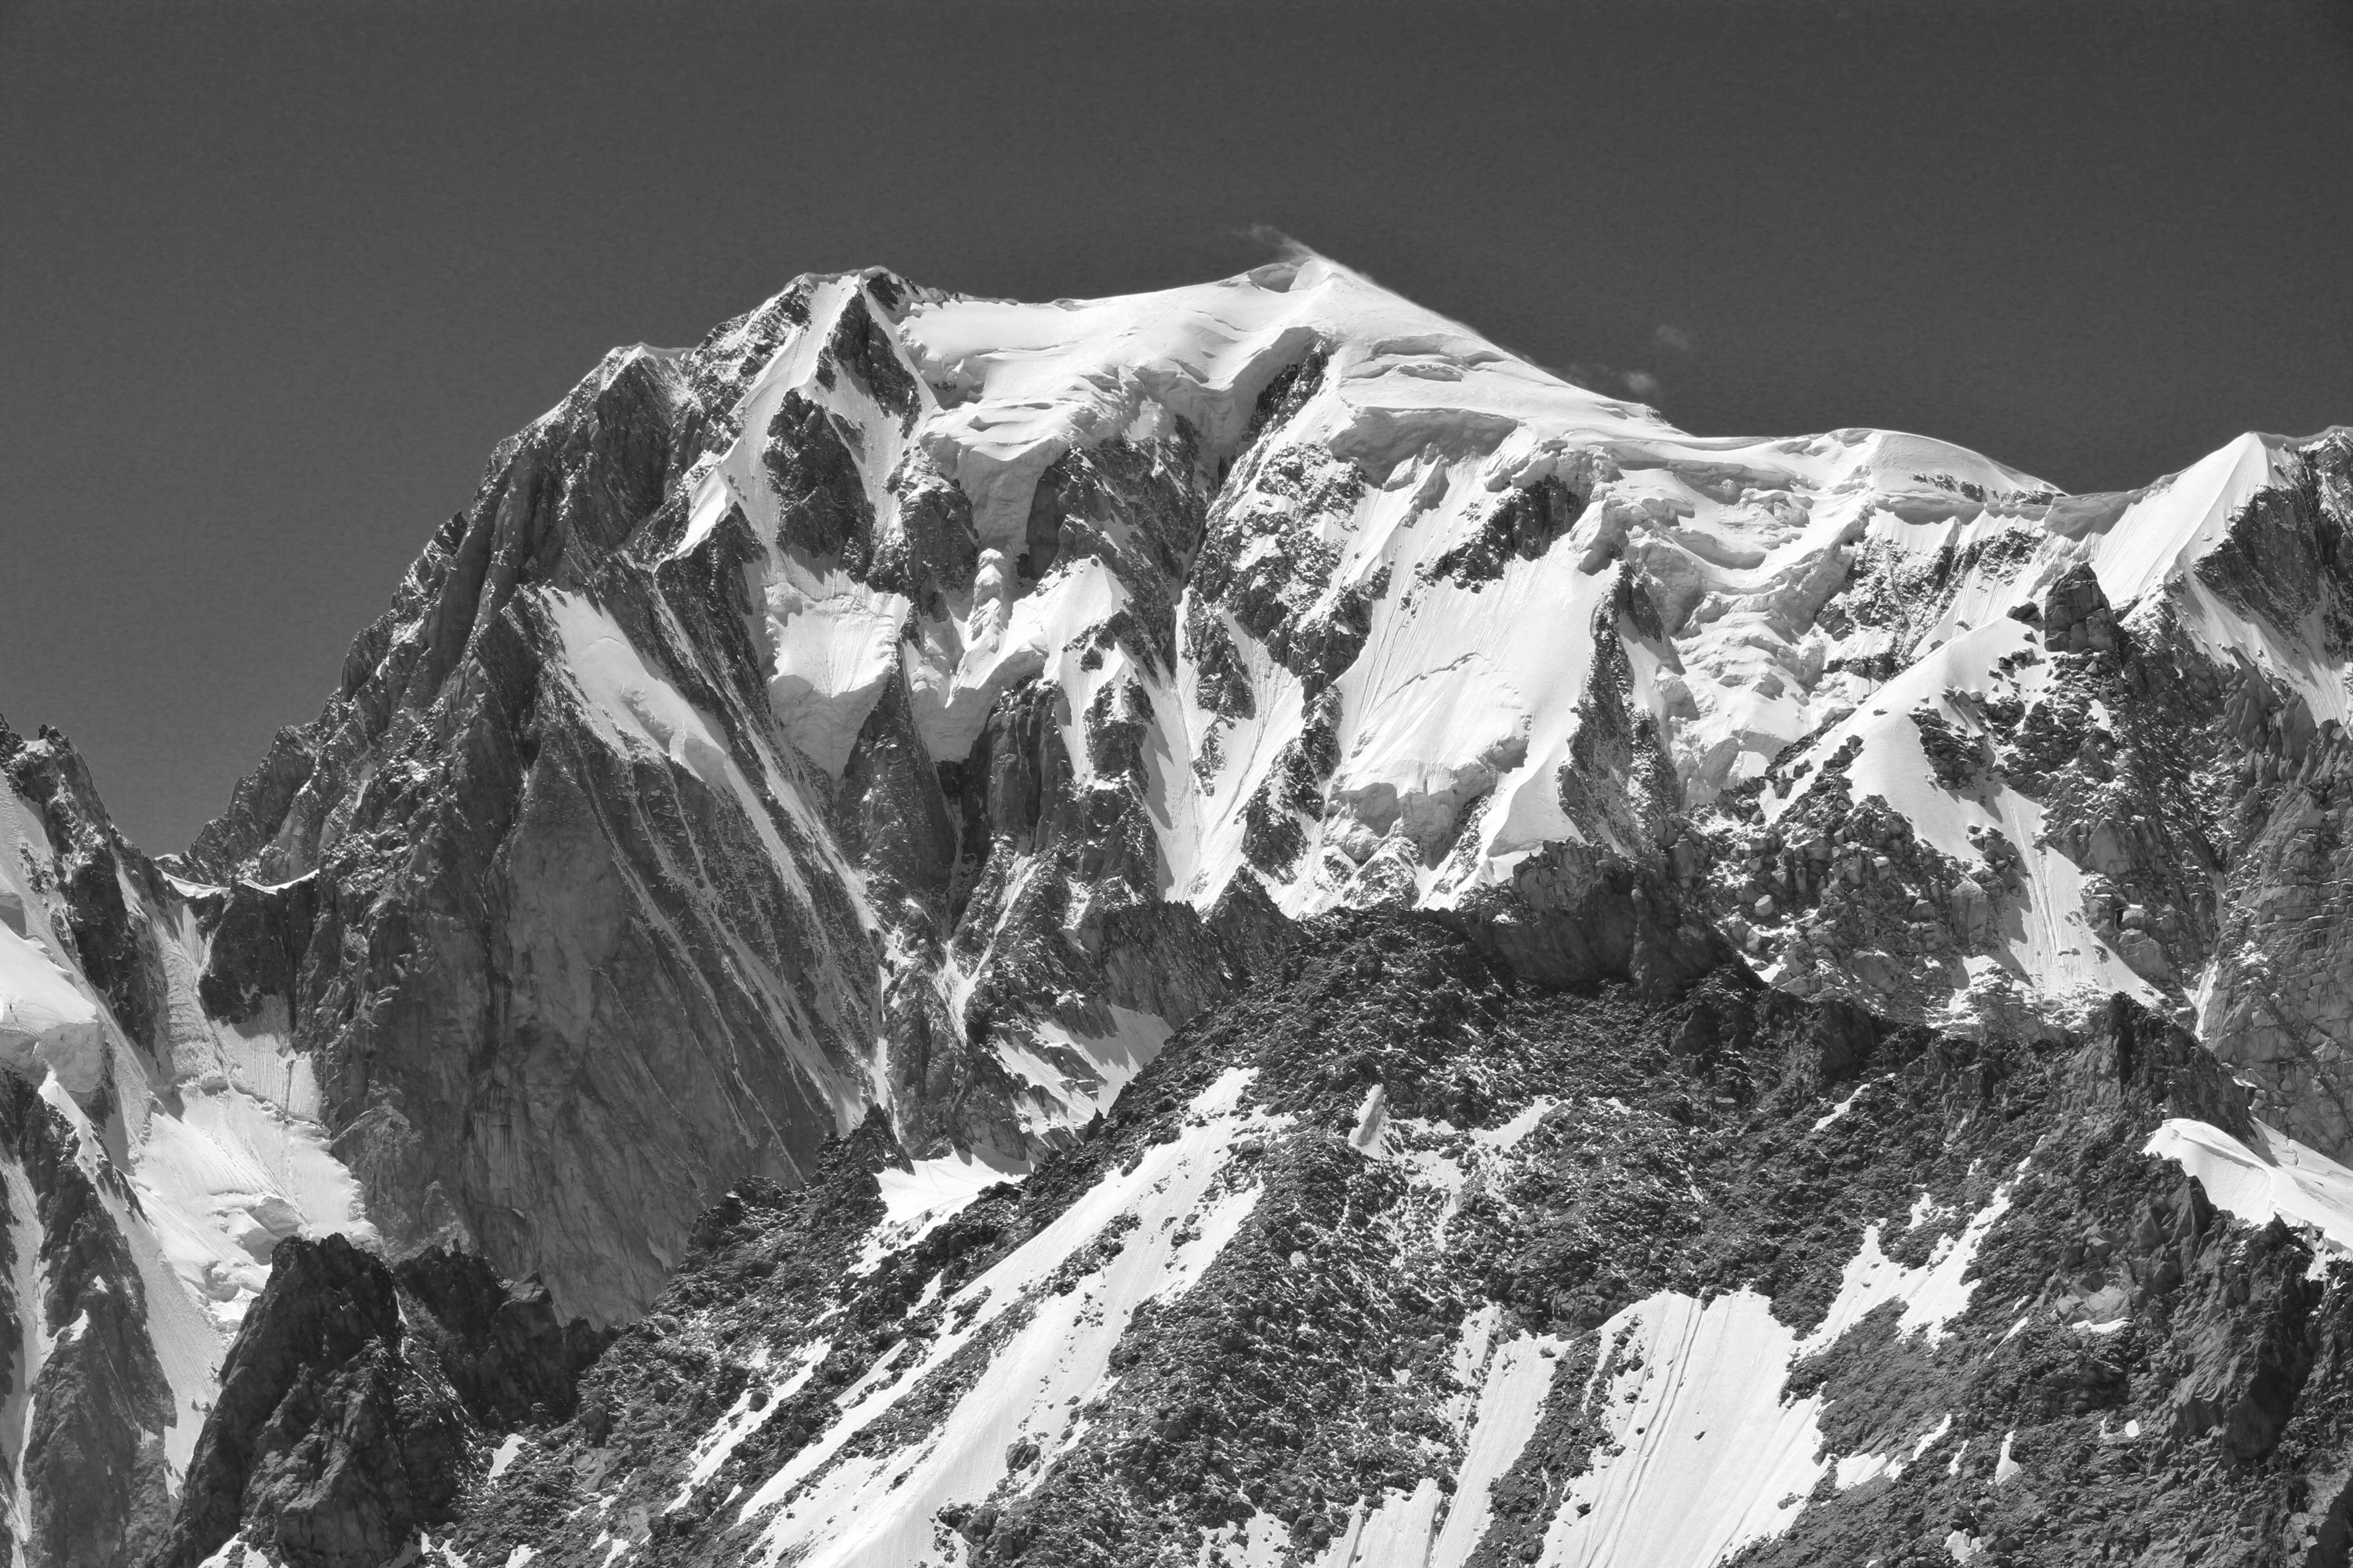 Mont Blanc from Punta Helbronner, 2010 July, bw